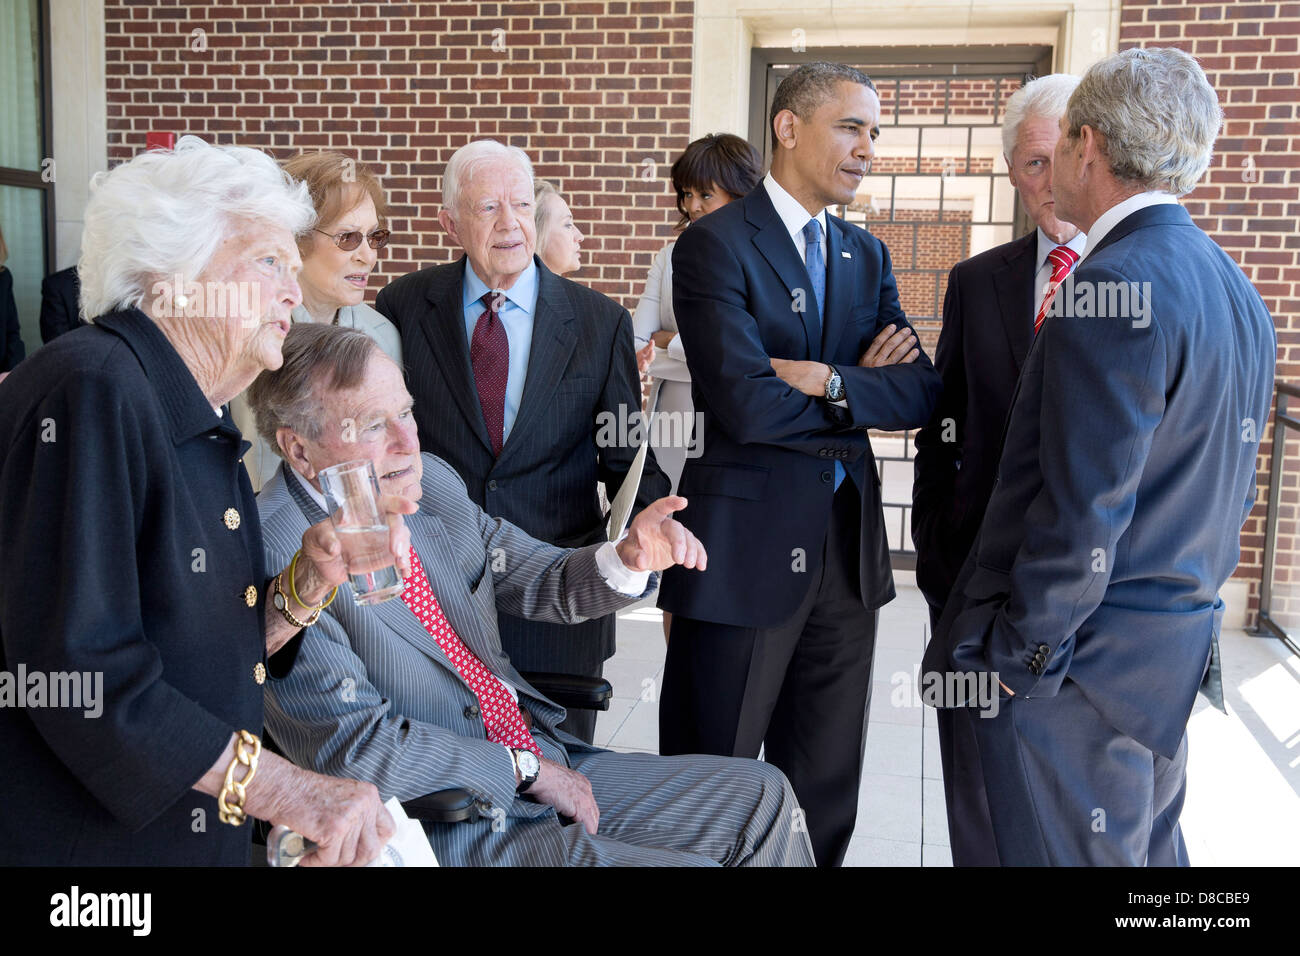 US President Barack Obama and First Lady Michelle Obama talk with former Presidents and First Ladies before a luncheon Stock Photo